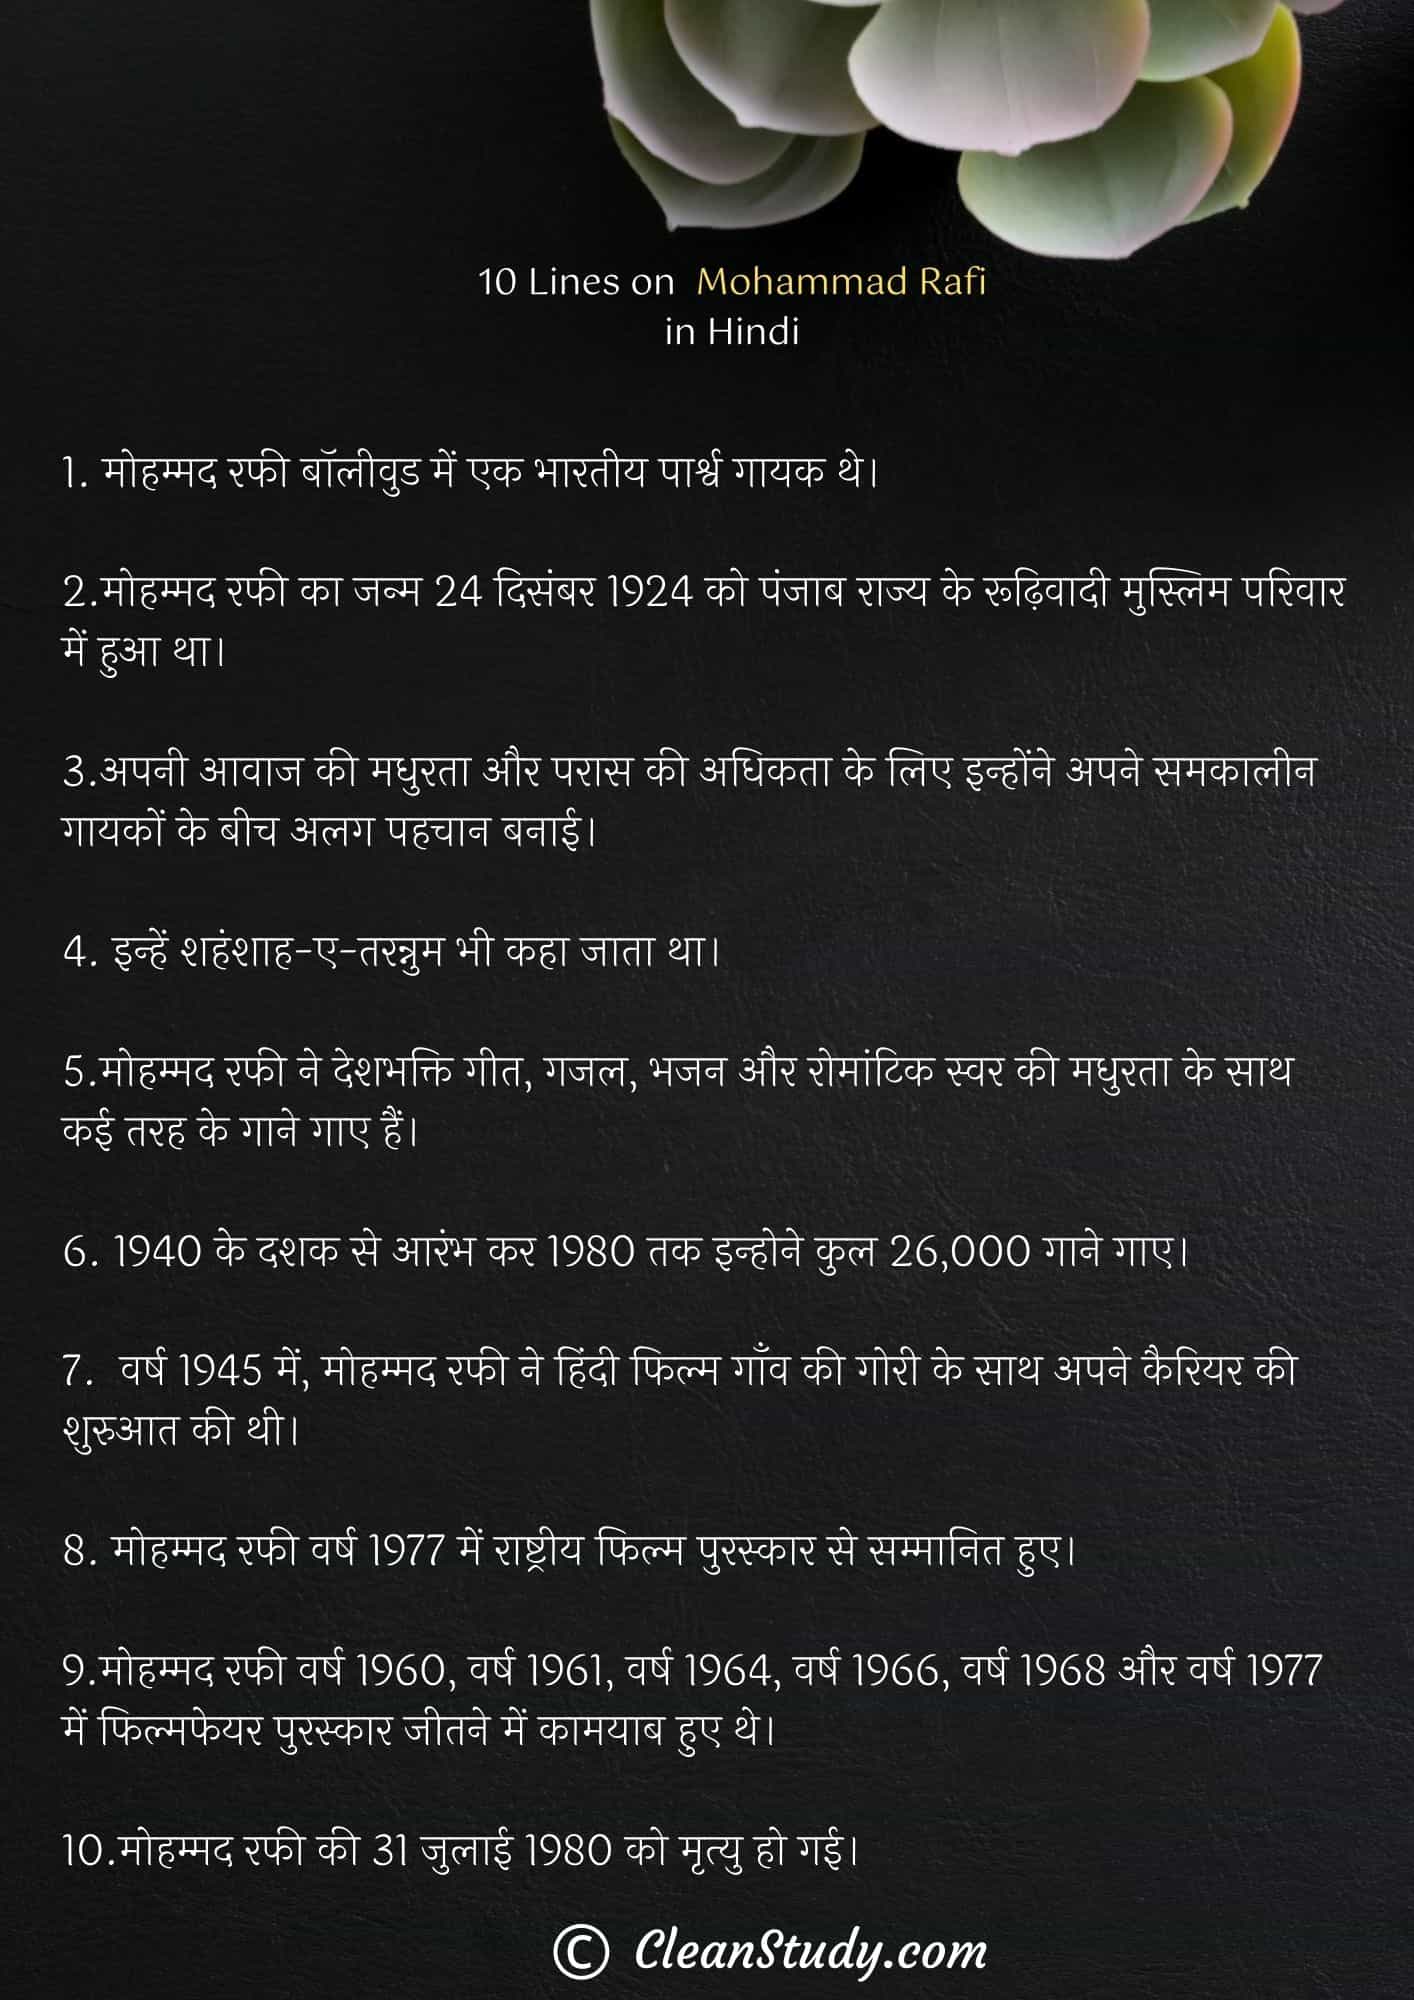 10 Lines on Mohammad Rafi in Hindi